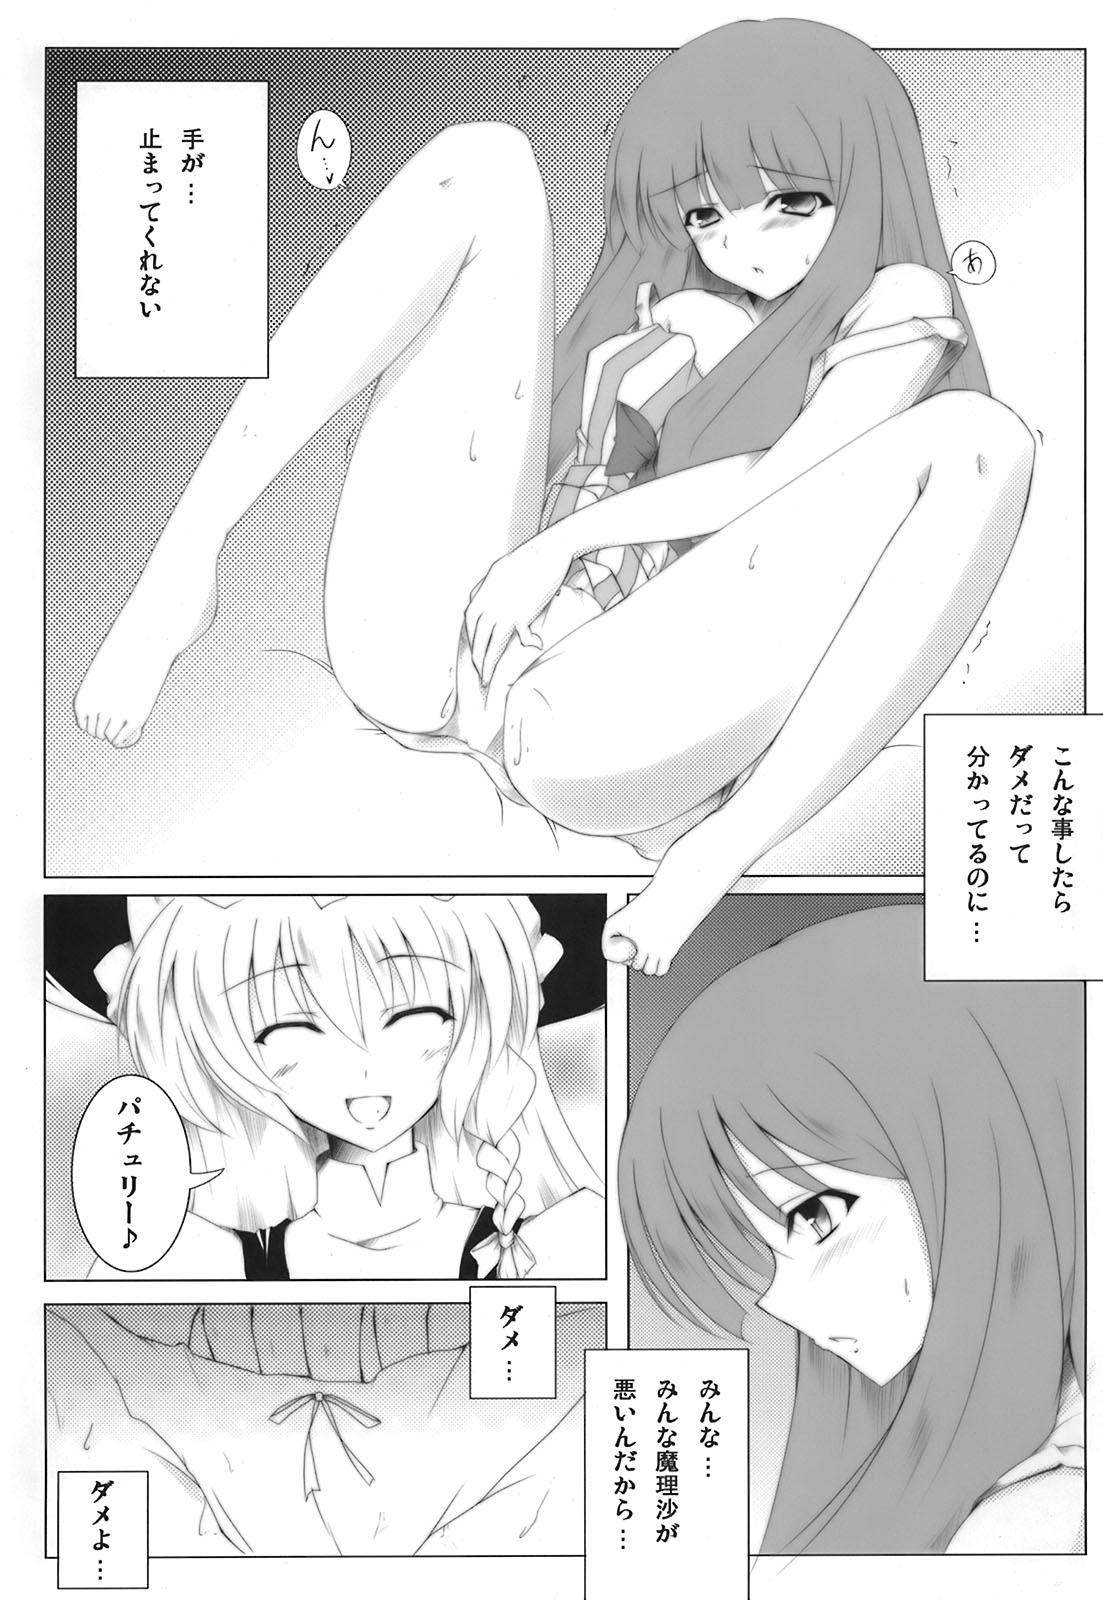 Heels Patchlism - Touhou project Camwhore - Page 7